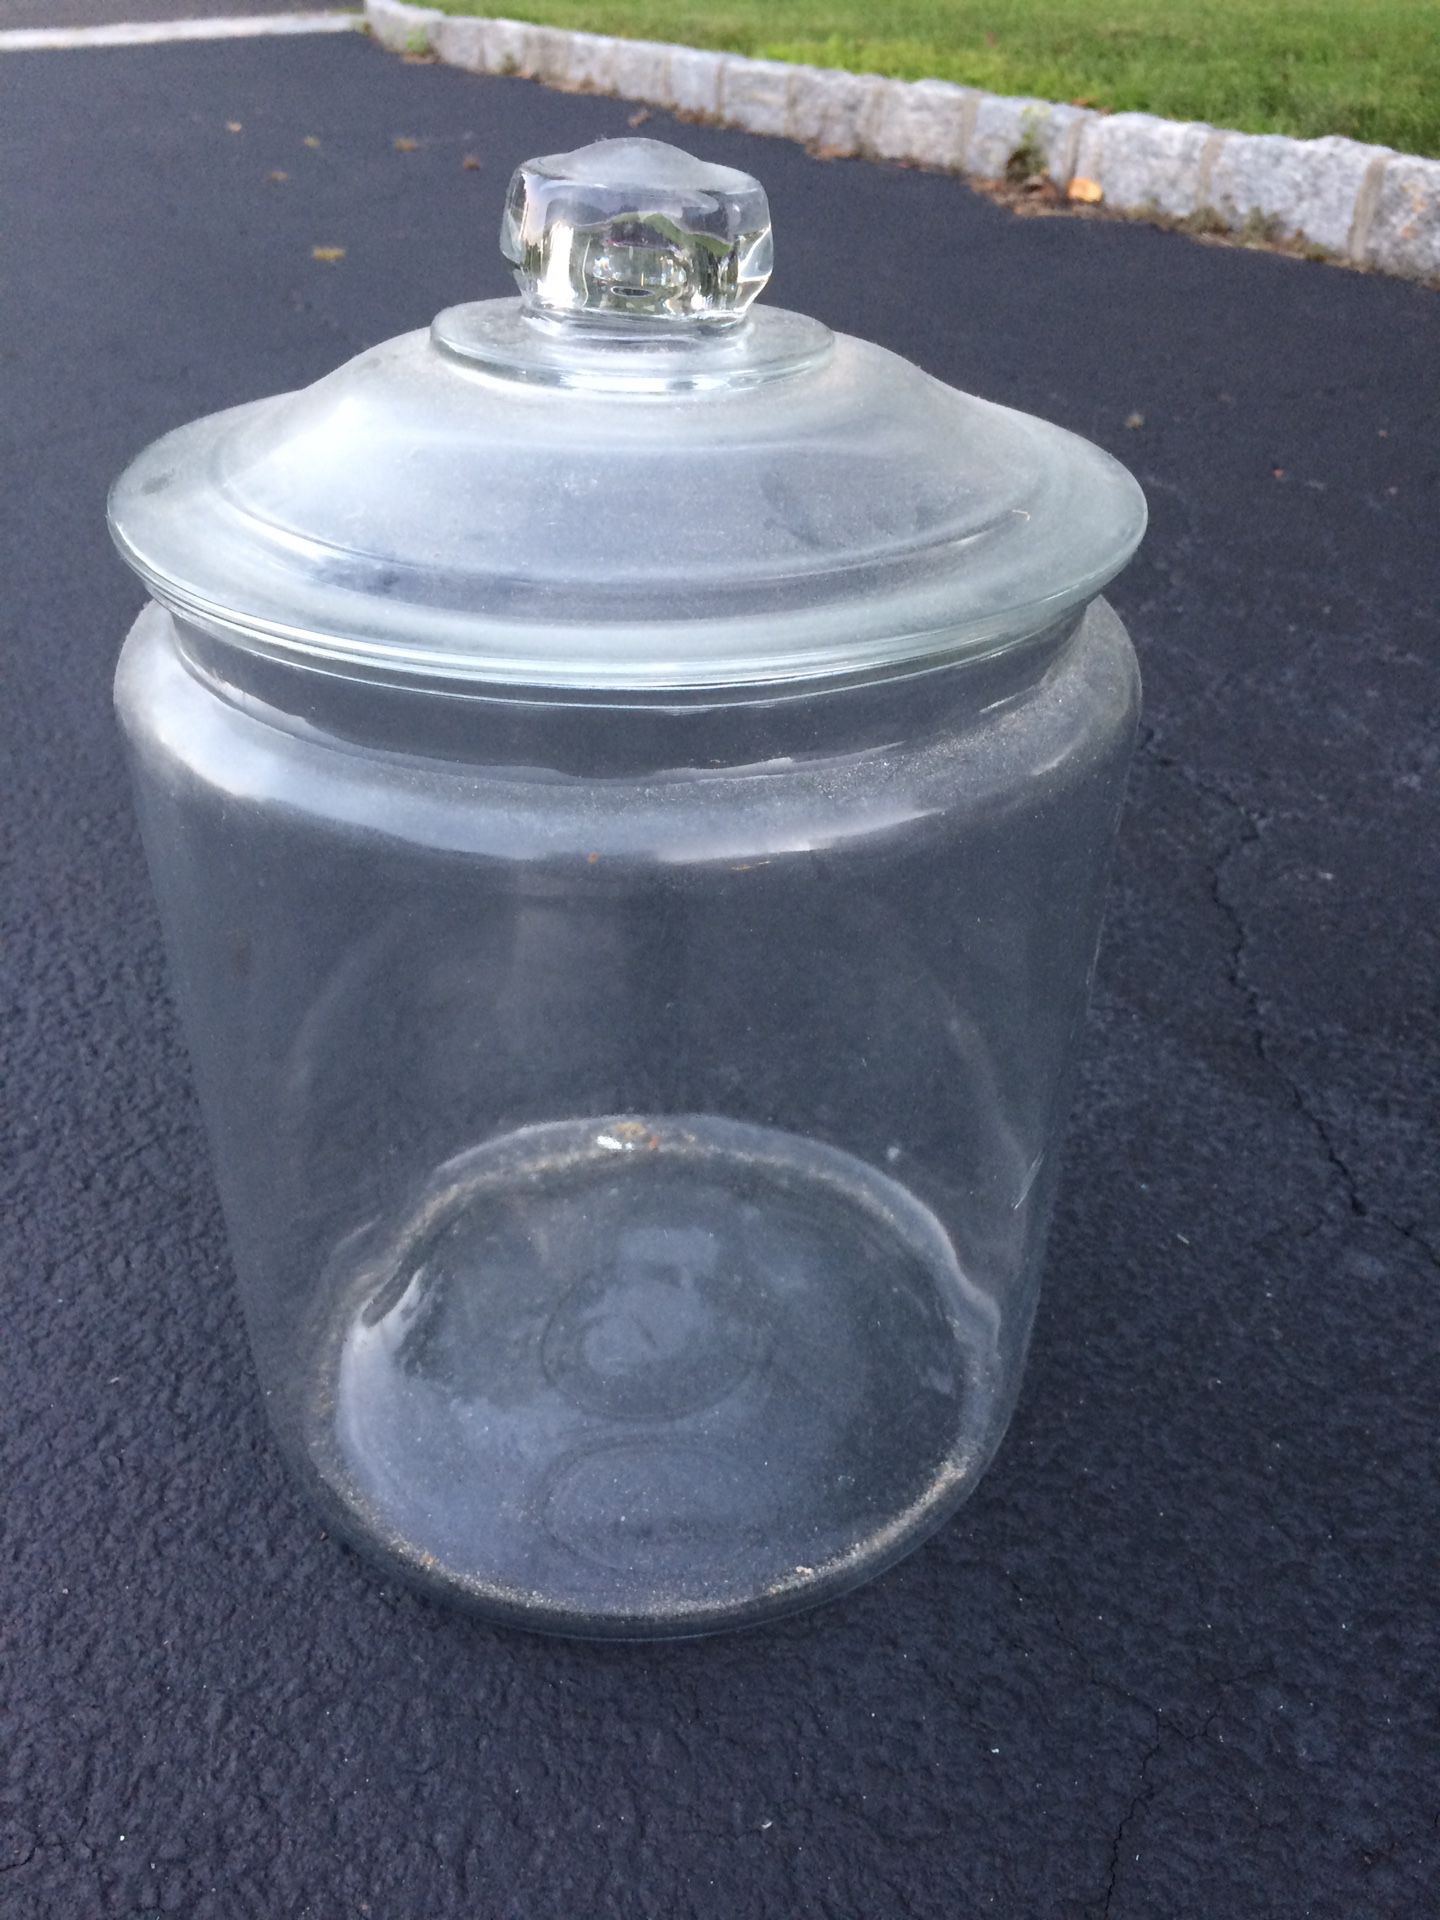 Large Glass Cookie / Candy Bar Jar with Lid 13.5” high x 8.5” wide.